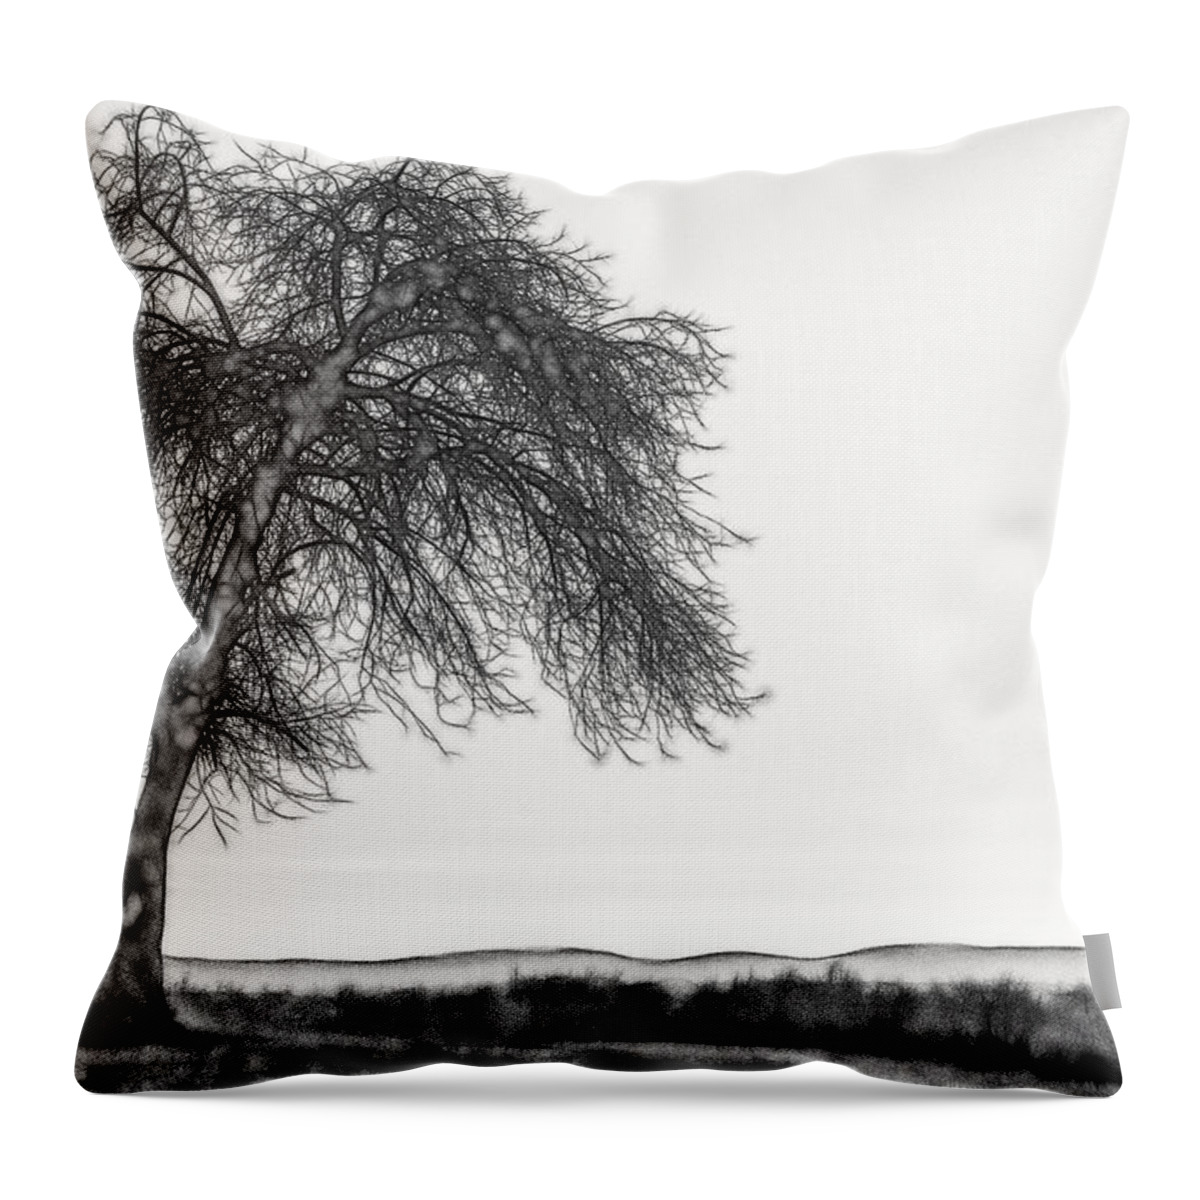 Landscape Throw Pillow featuring the photograph Artistic Black and White Sunset Tree by Don Johnson